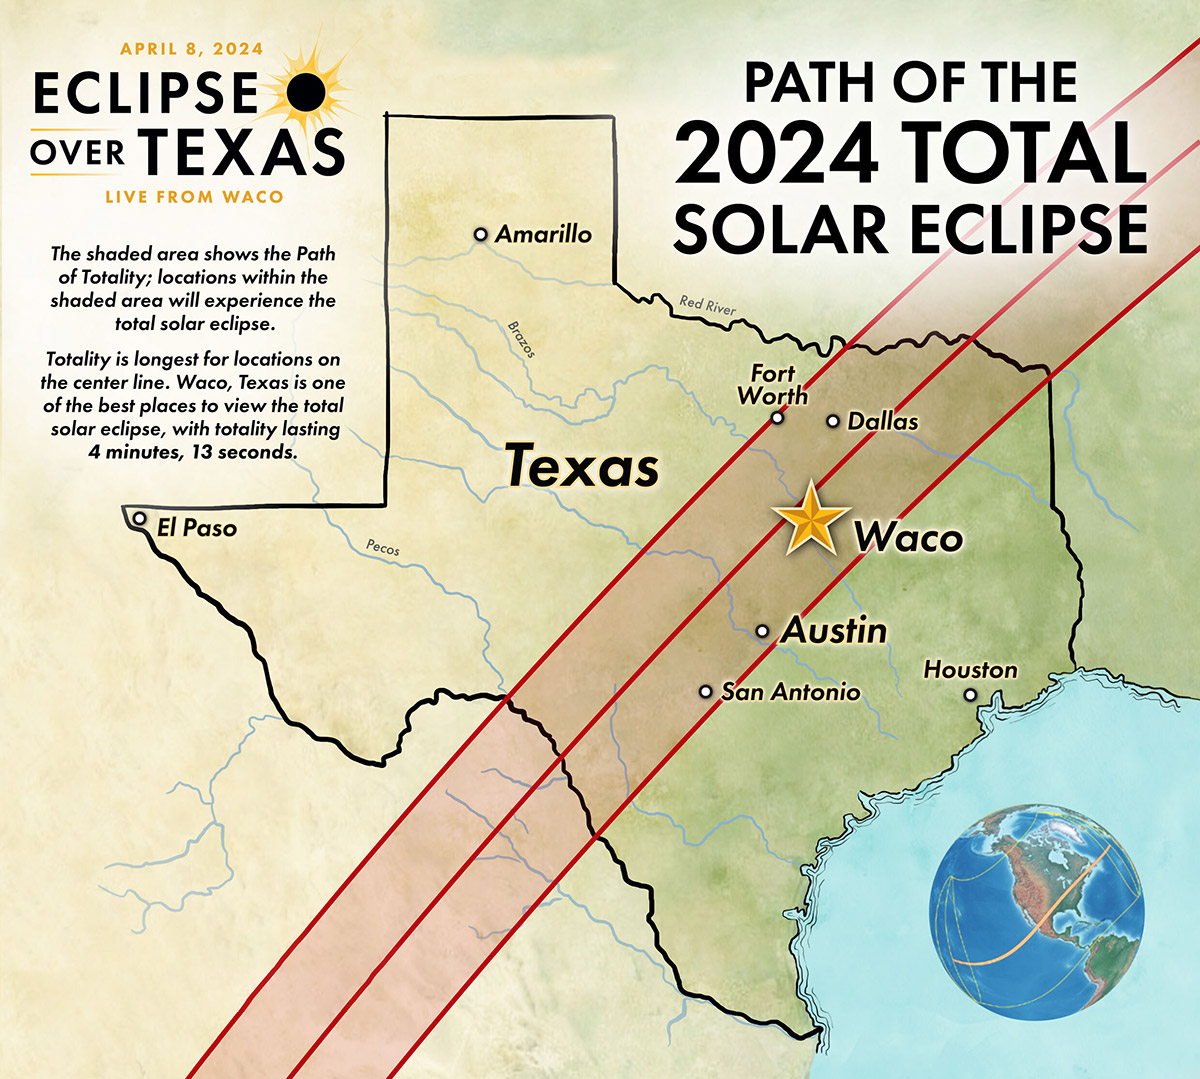 Eclipse Over Texas Map | 2024 Total Solar Eclipse | Baylor University